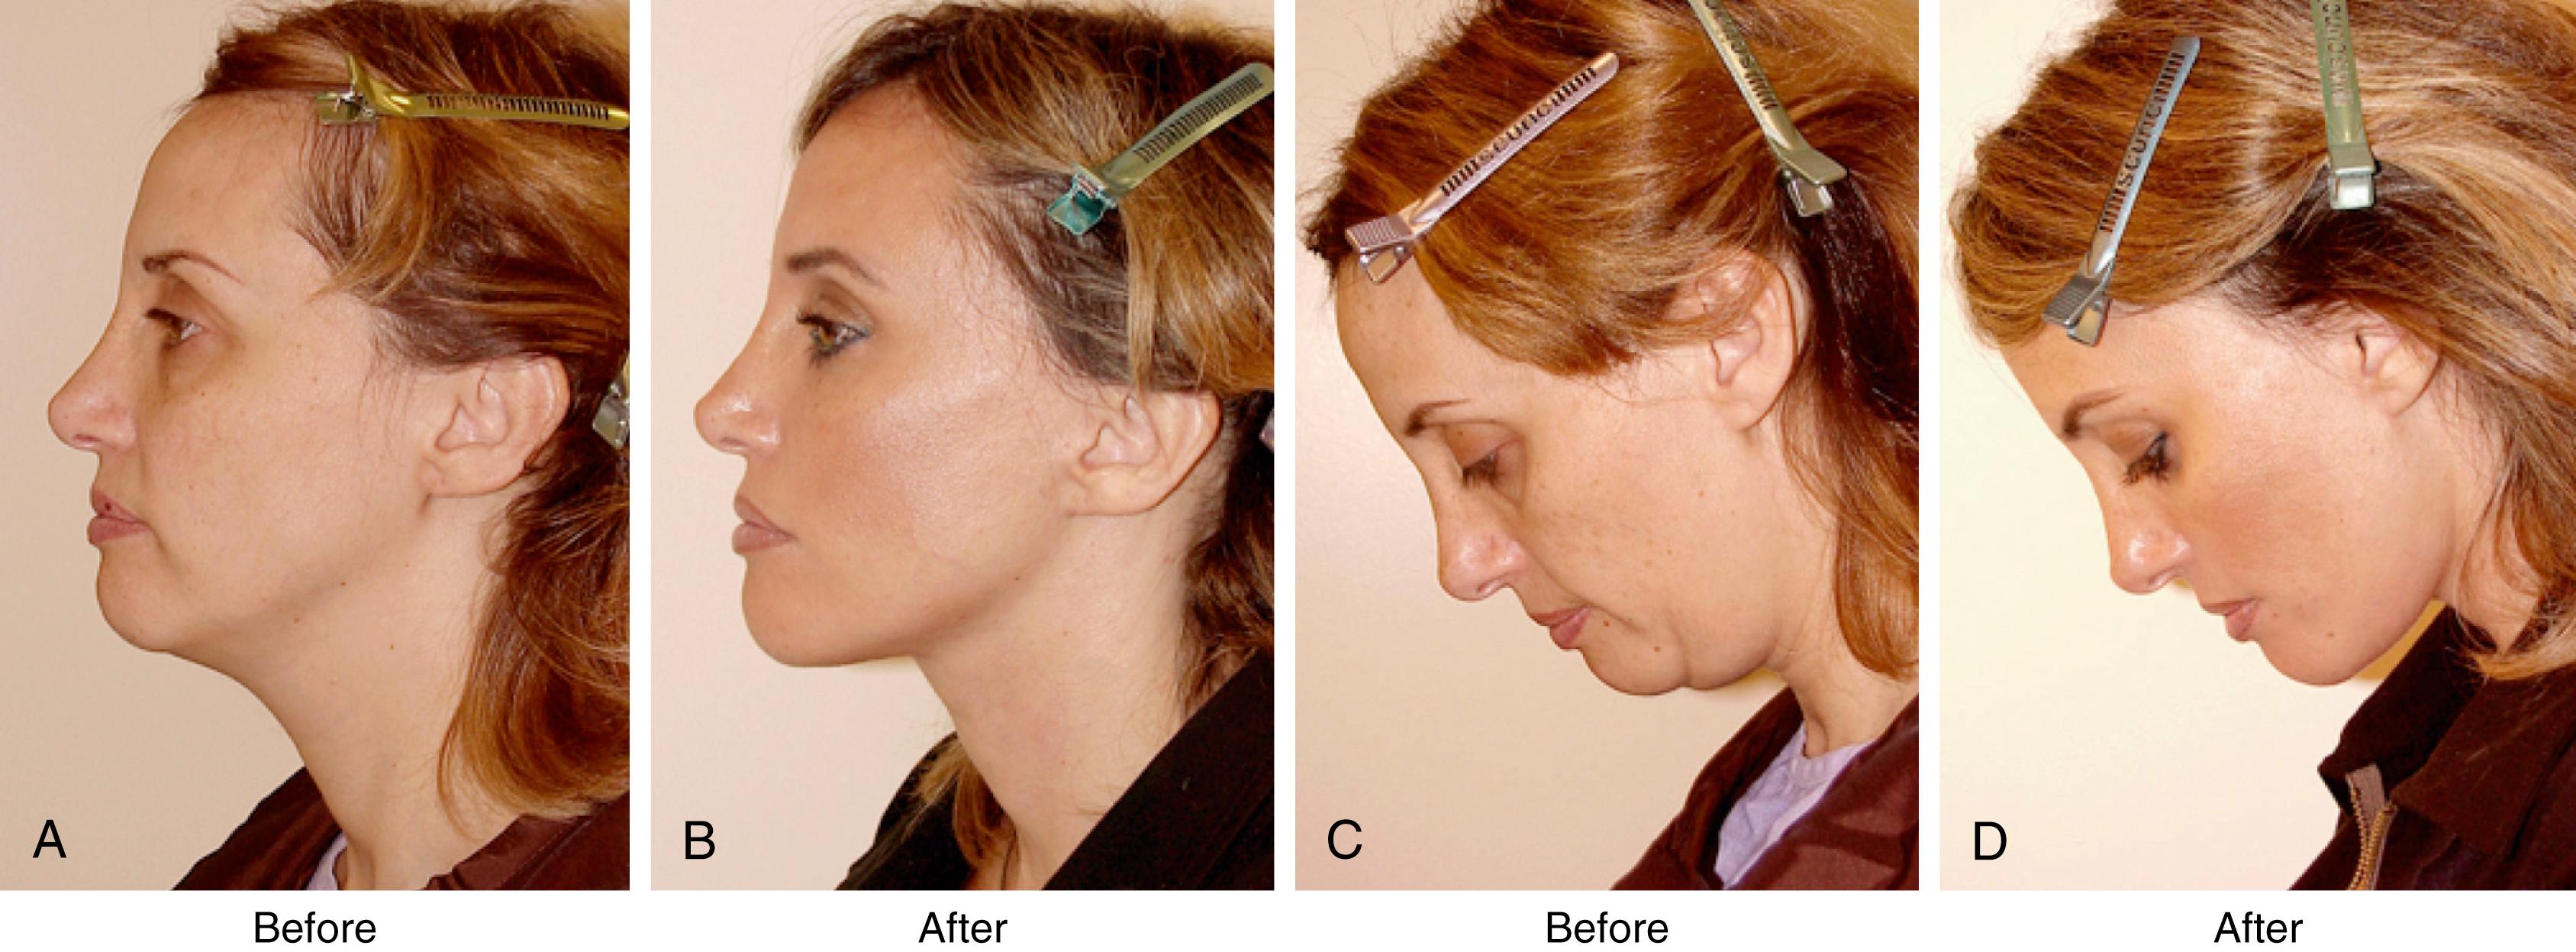 Fig. 67.1, Patient seen before and after neck lift. A good neckline conveys a sense of youth, health, fitness, confidence, vitality, decisiveness, sensuality, and beauty. The patient is seen (A,C) before and (B,D) 1 year and 3 months after facelift, temple lift, lower eyelid surgery, and facial fat injections.